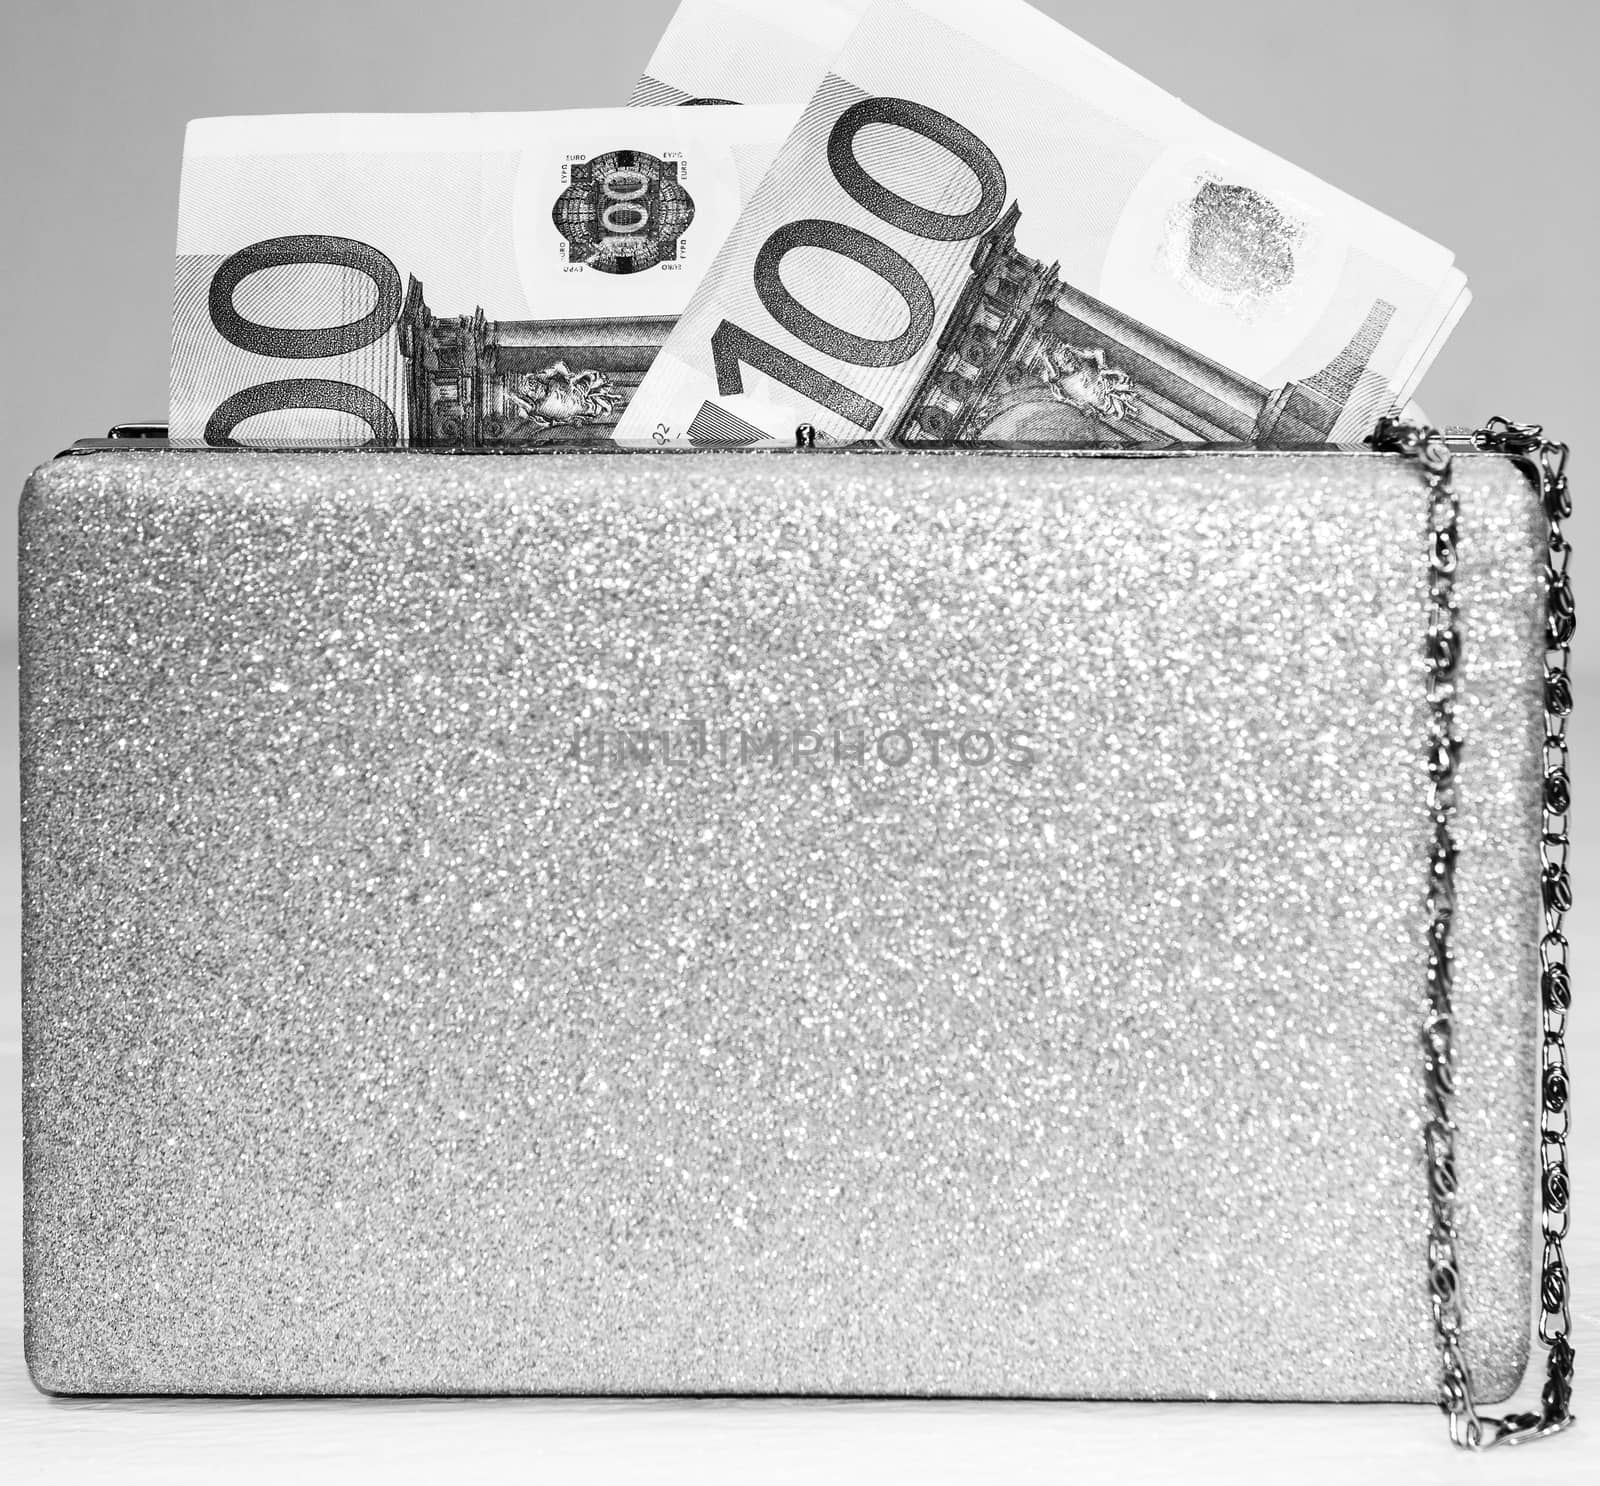 Glittery silver clutch bag with money isolated on white background with copy space.